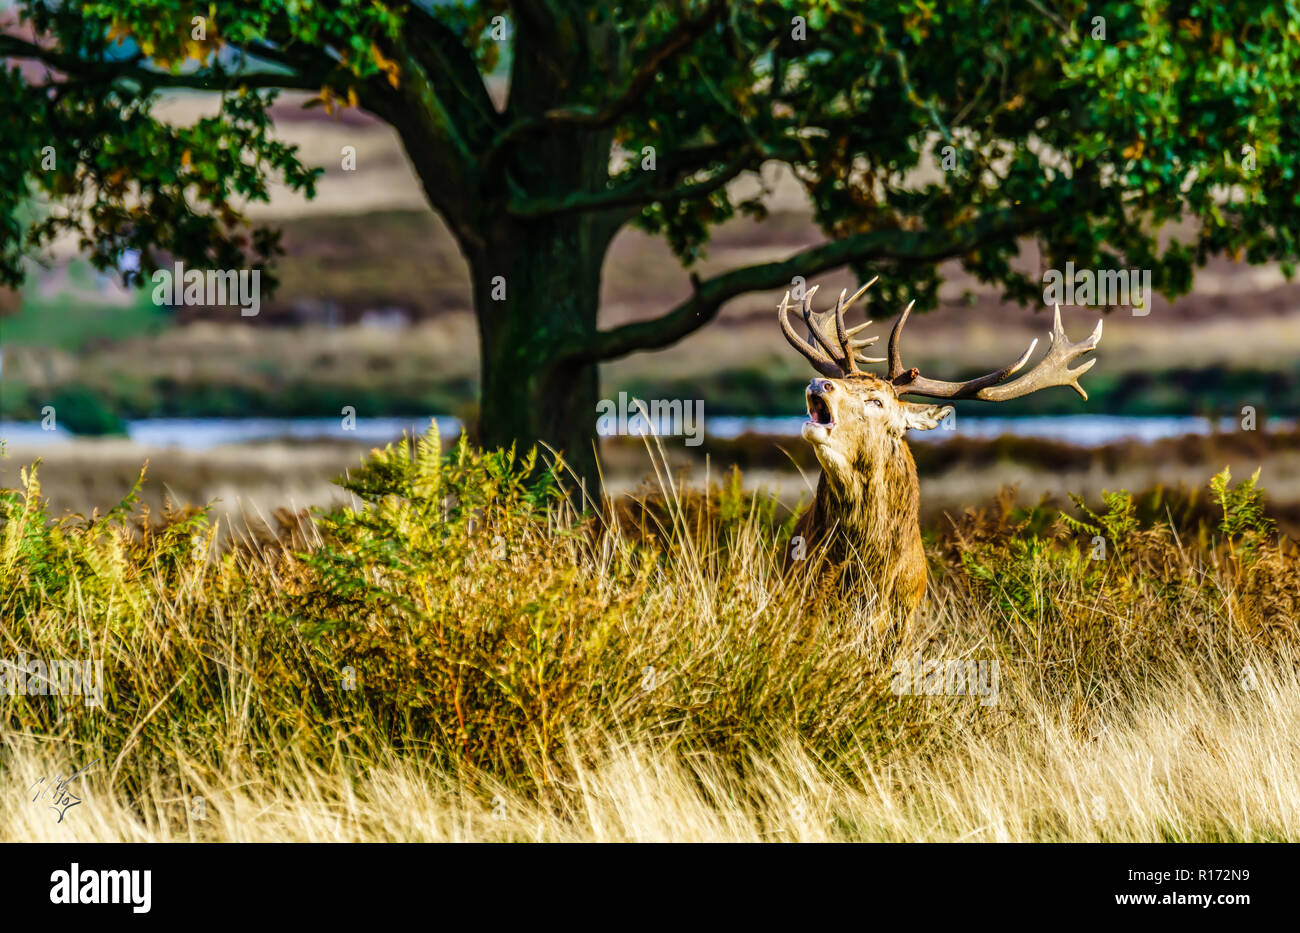 Stag in Richmond Park Stock Photo